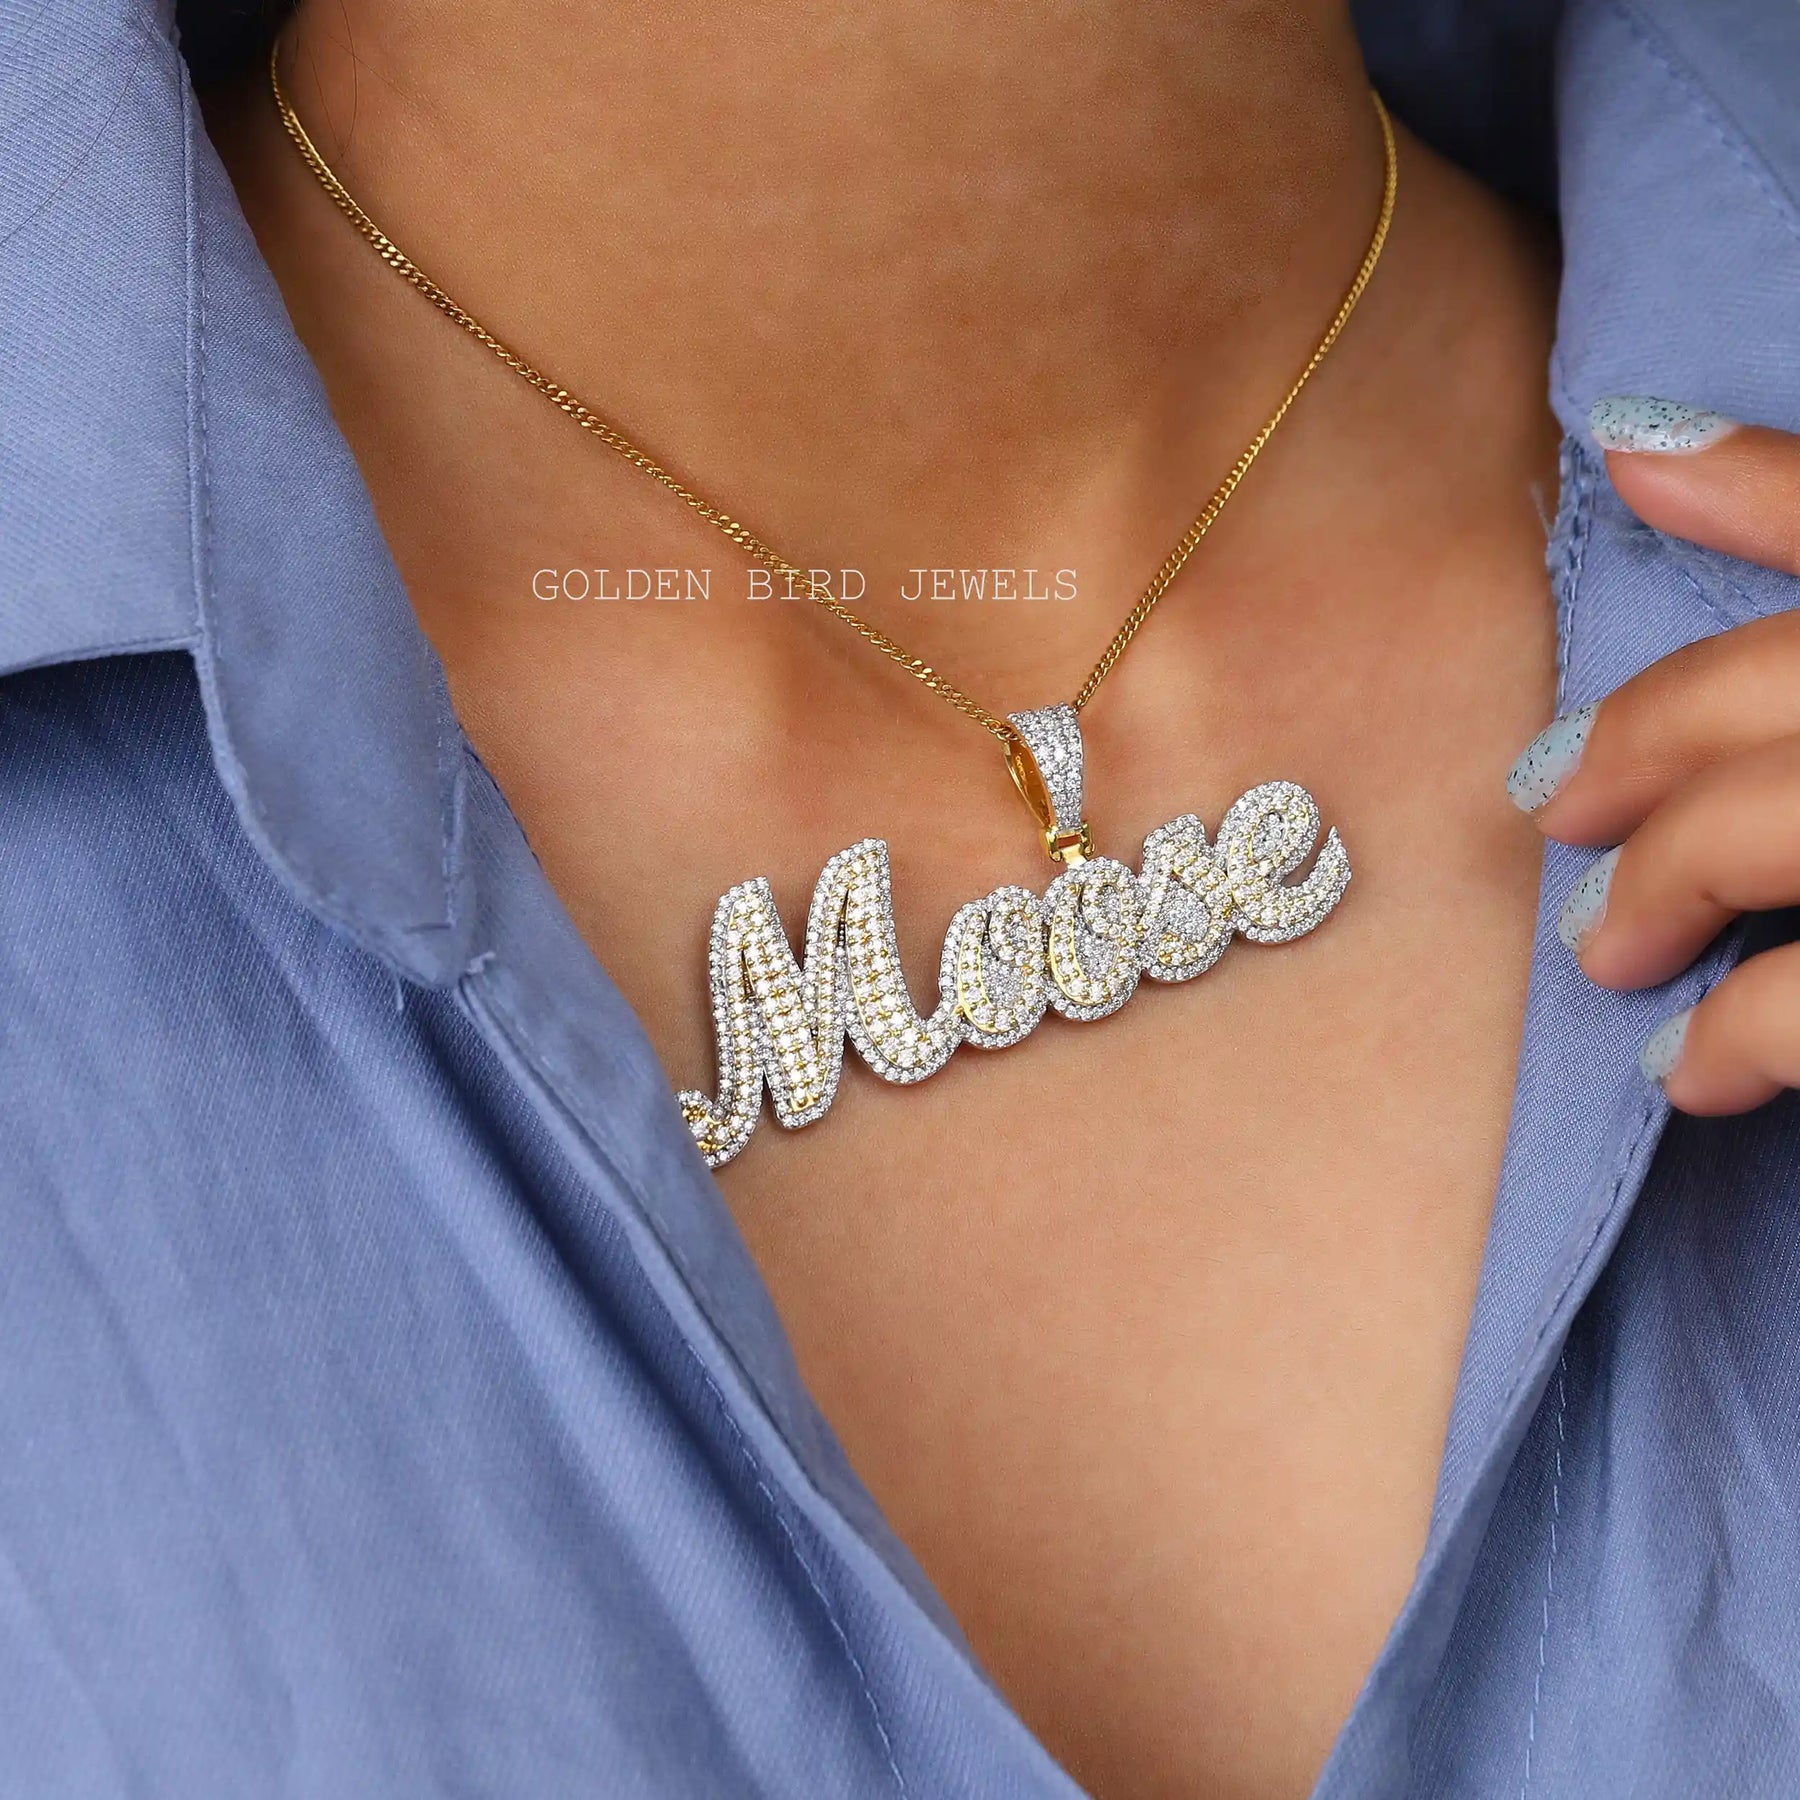 [In neck front view of round cut customized letter pendant]-[Golden Bird Jewels]